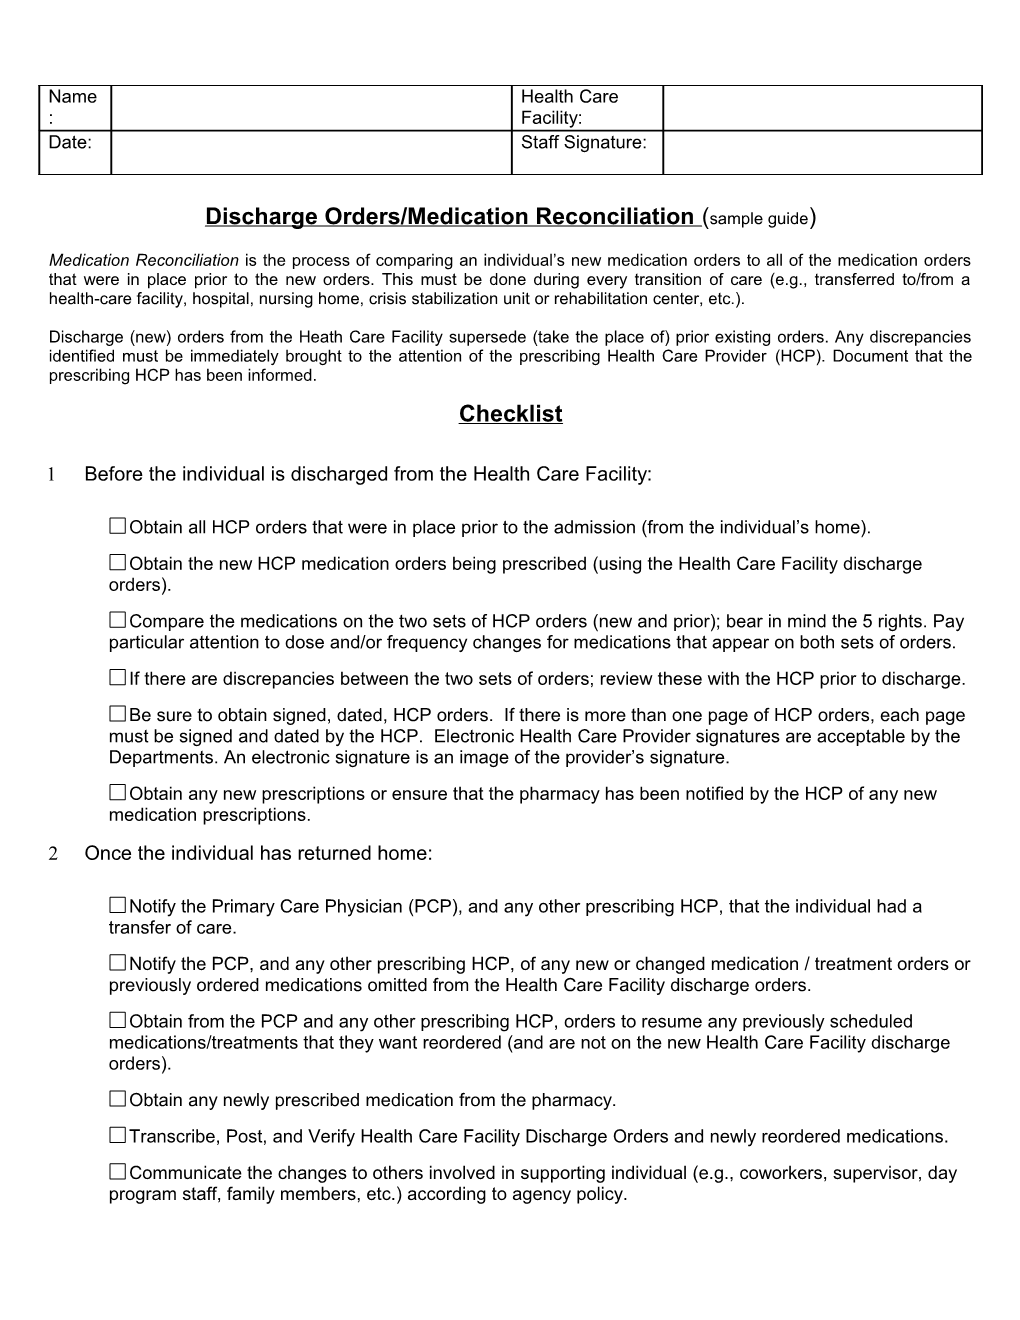 Discharge Orders/Medication Reconciliation (Sample Guide)